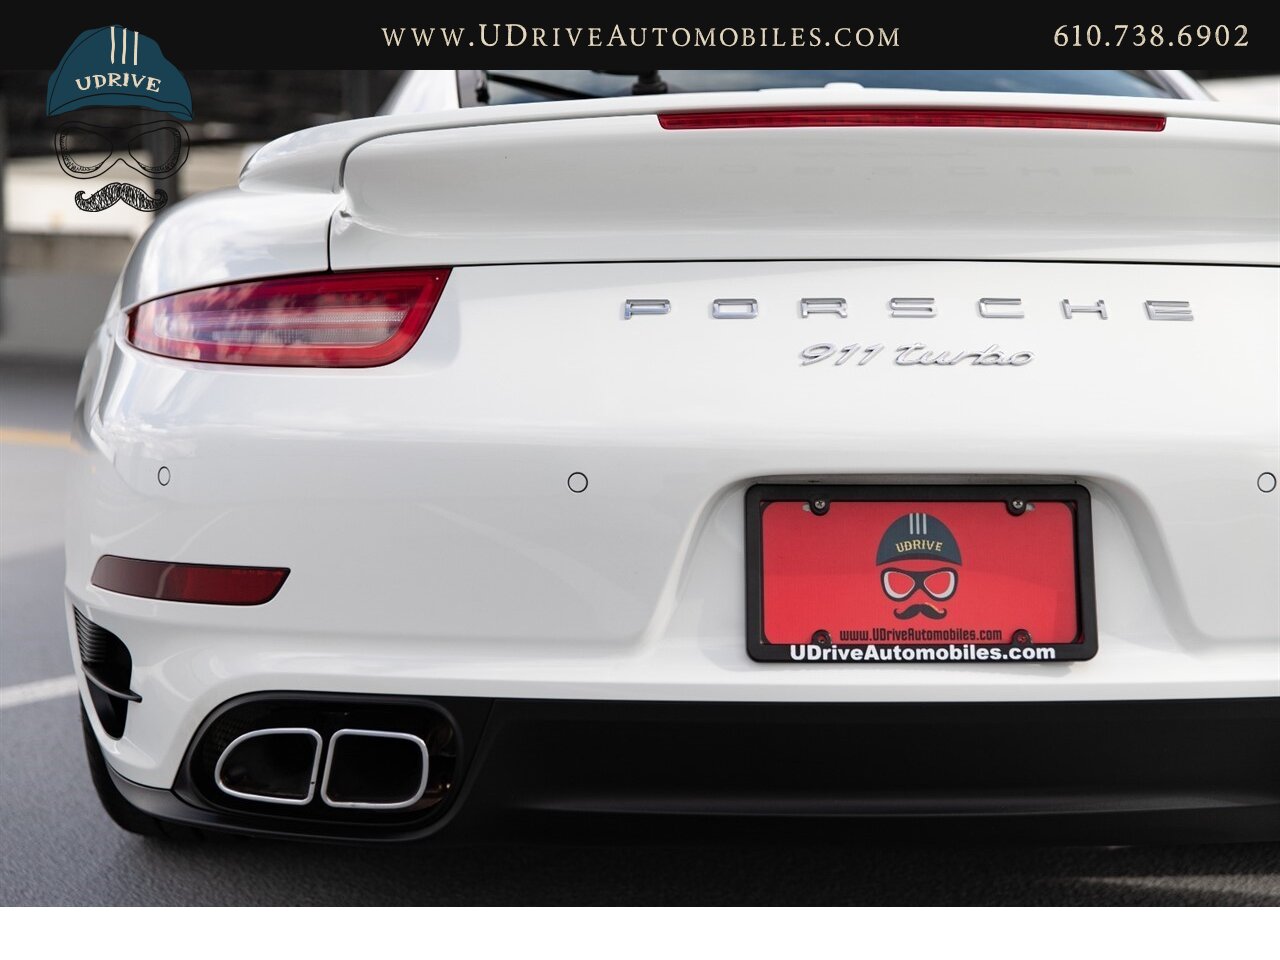 2014 Porsche 911 Turbo 12k Miles White over Black Chrono Rear Wiper  Sport Seats 20in Turbo Whls Sunroof Red Belts - Photo 20 - West Chester, PA 19382